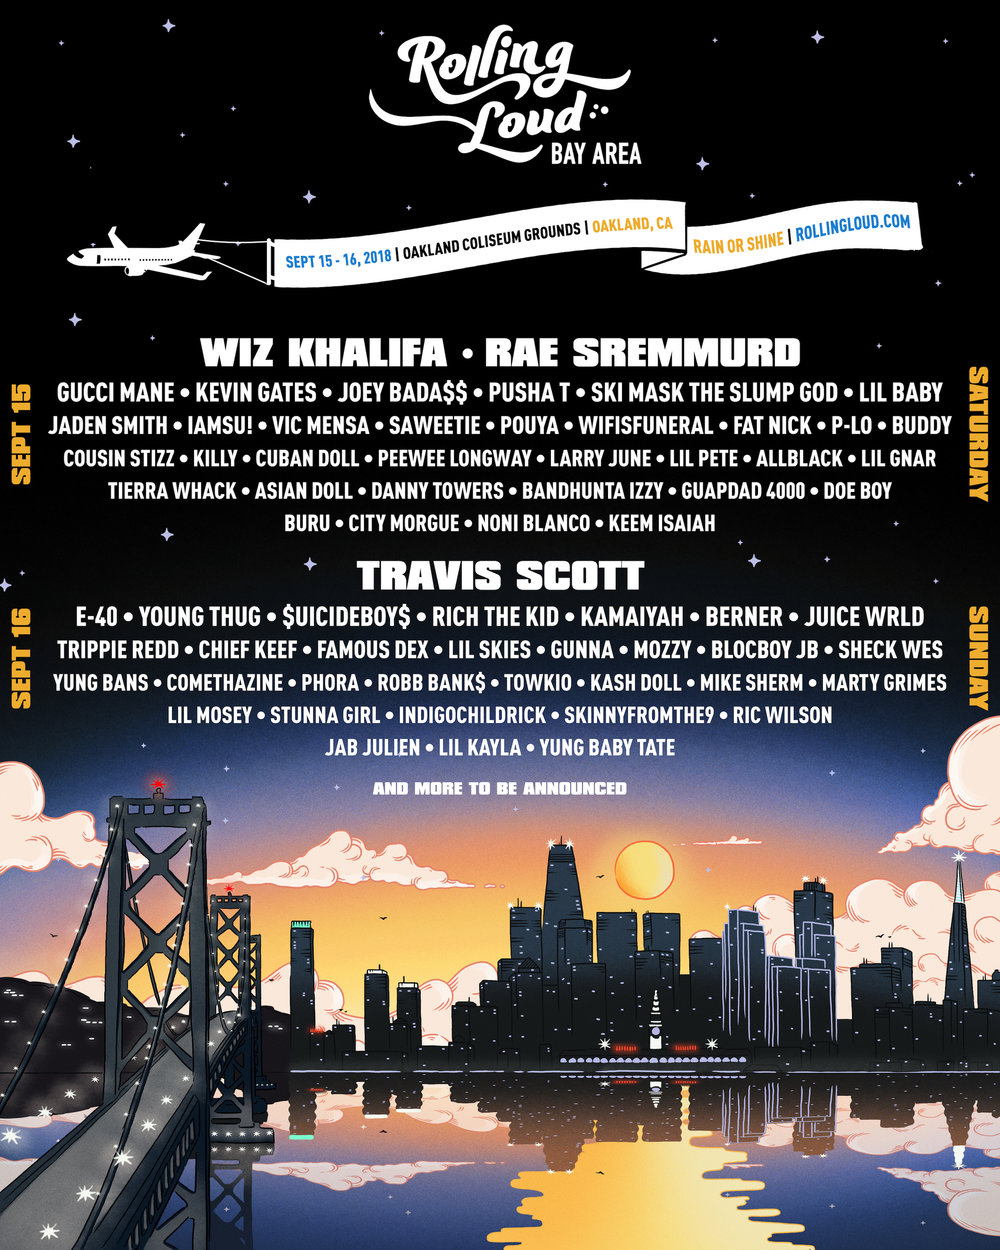 Rolling Loud Festival Announces A Deep Lineup For The Bay Area Show The Latest HipHop News